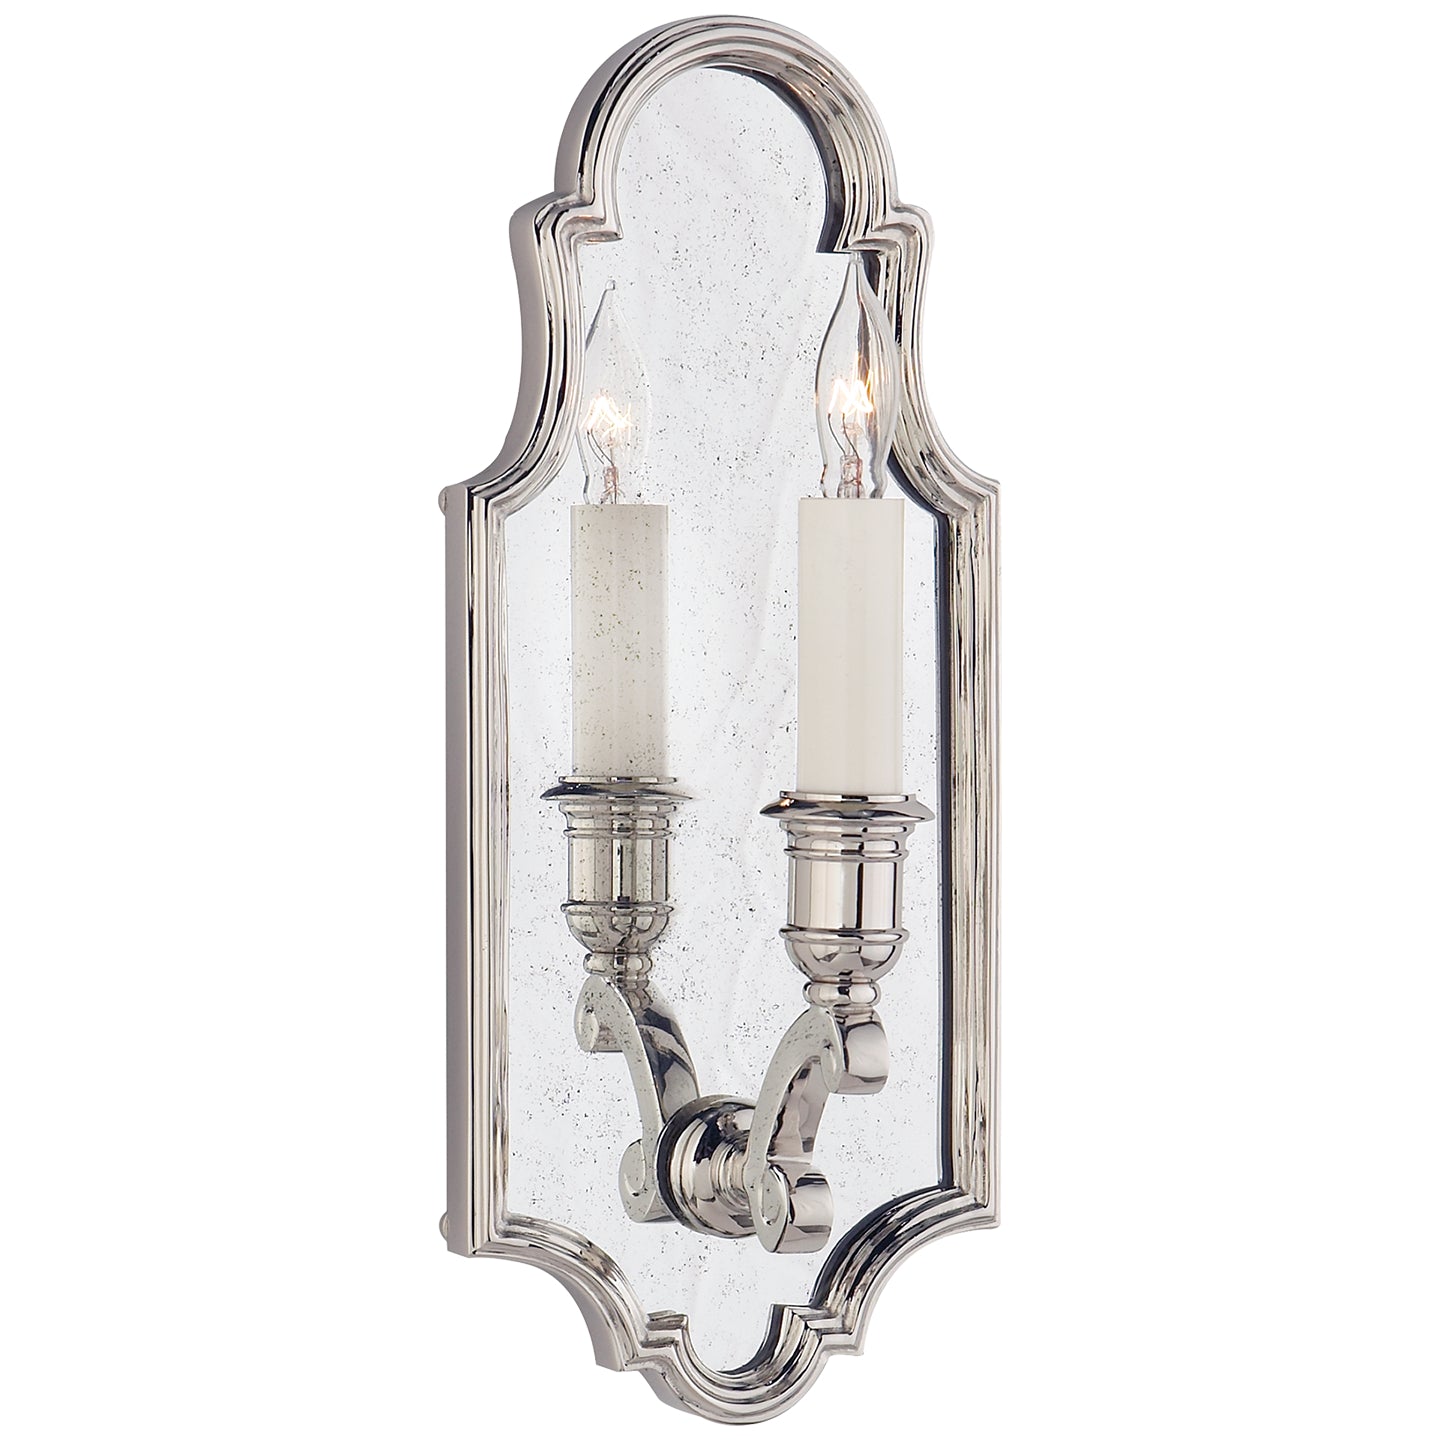 Visual Comfort Signature - CHD 1183PN - One Light Wall Sconce - Sussex - Polished Nickel